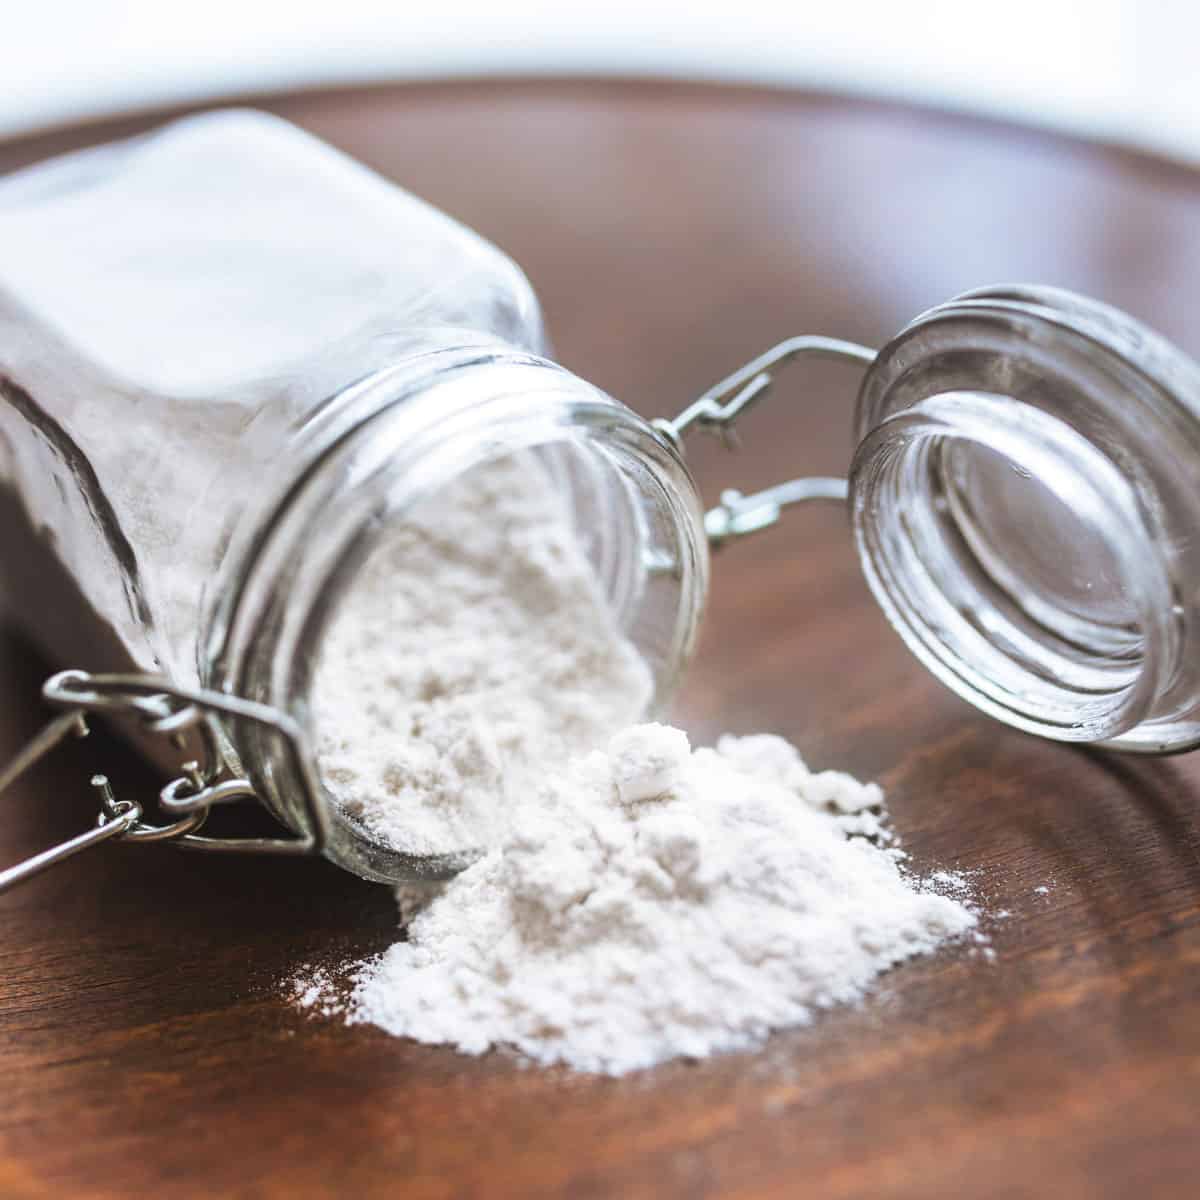 How To Make Self Raising Flour With 2 Ingredients - Bake Play Smile